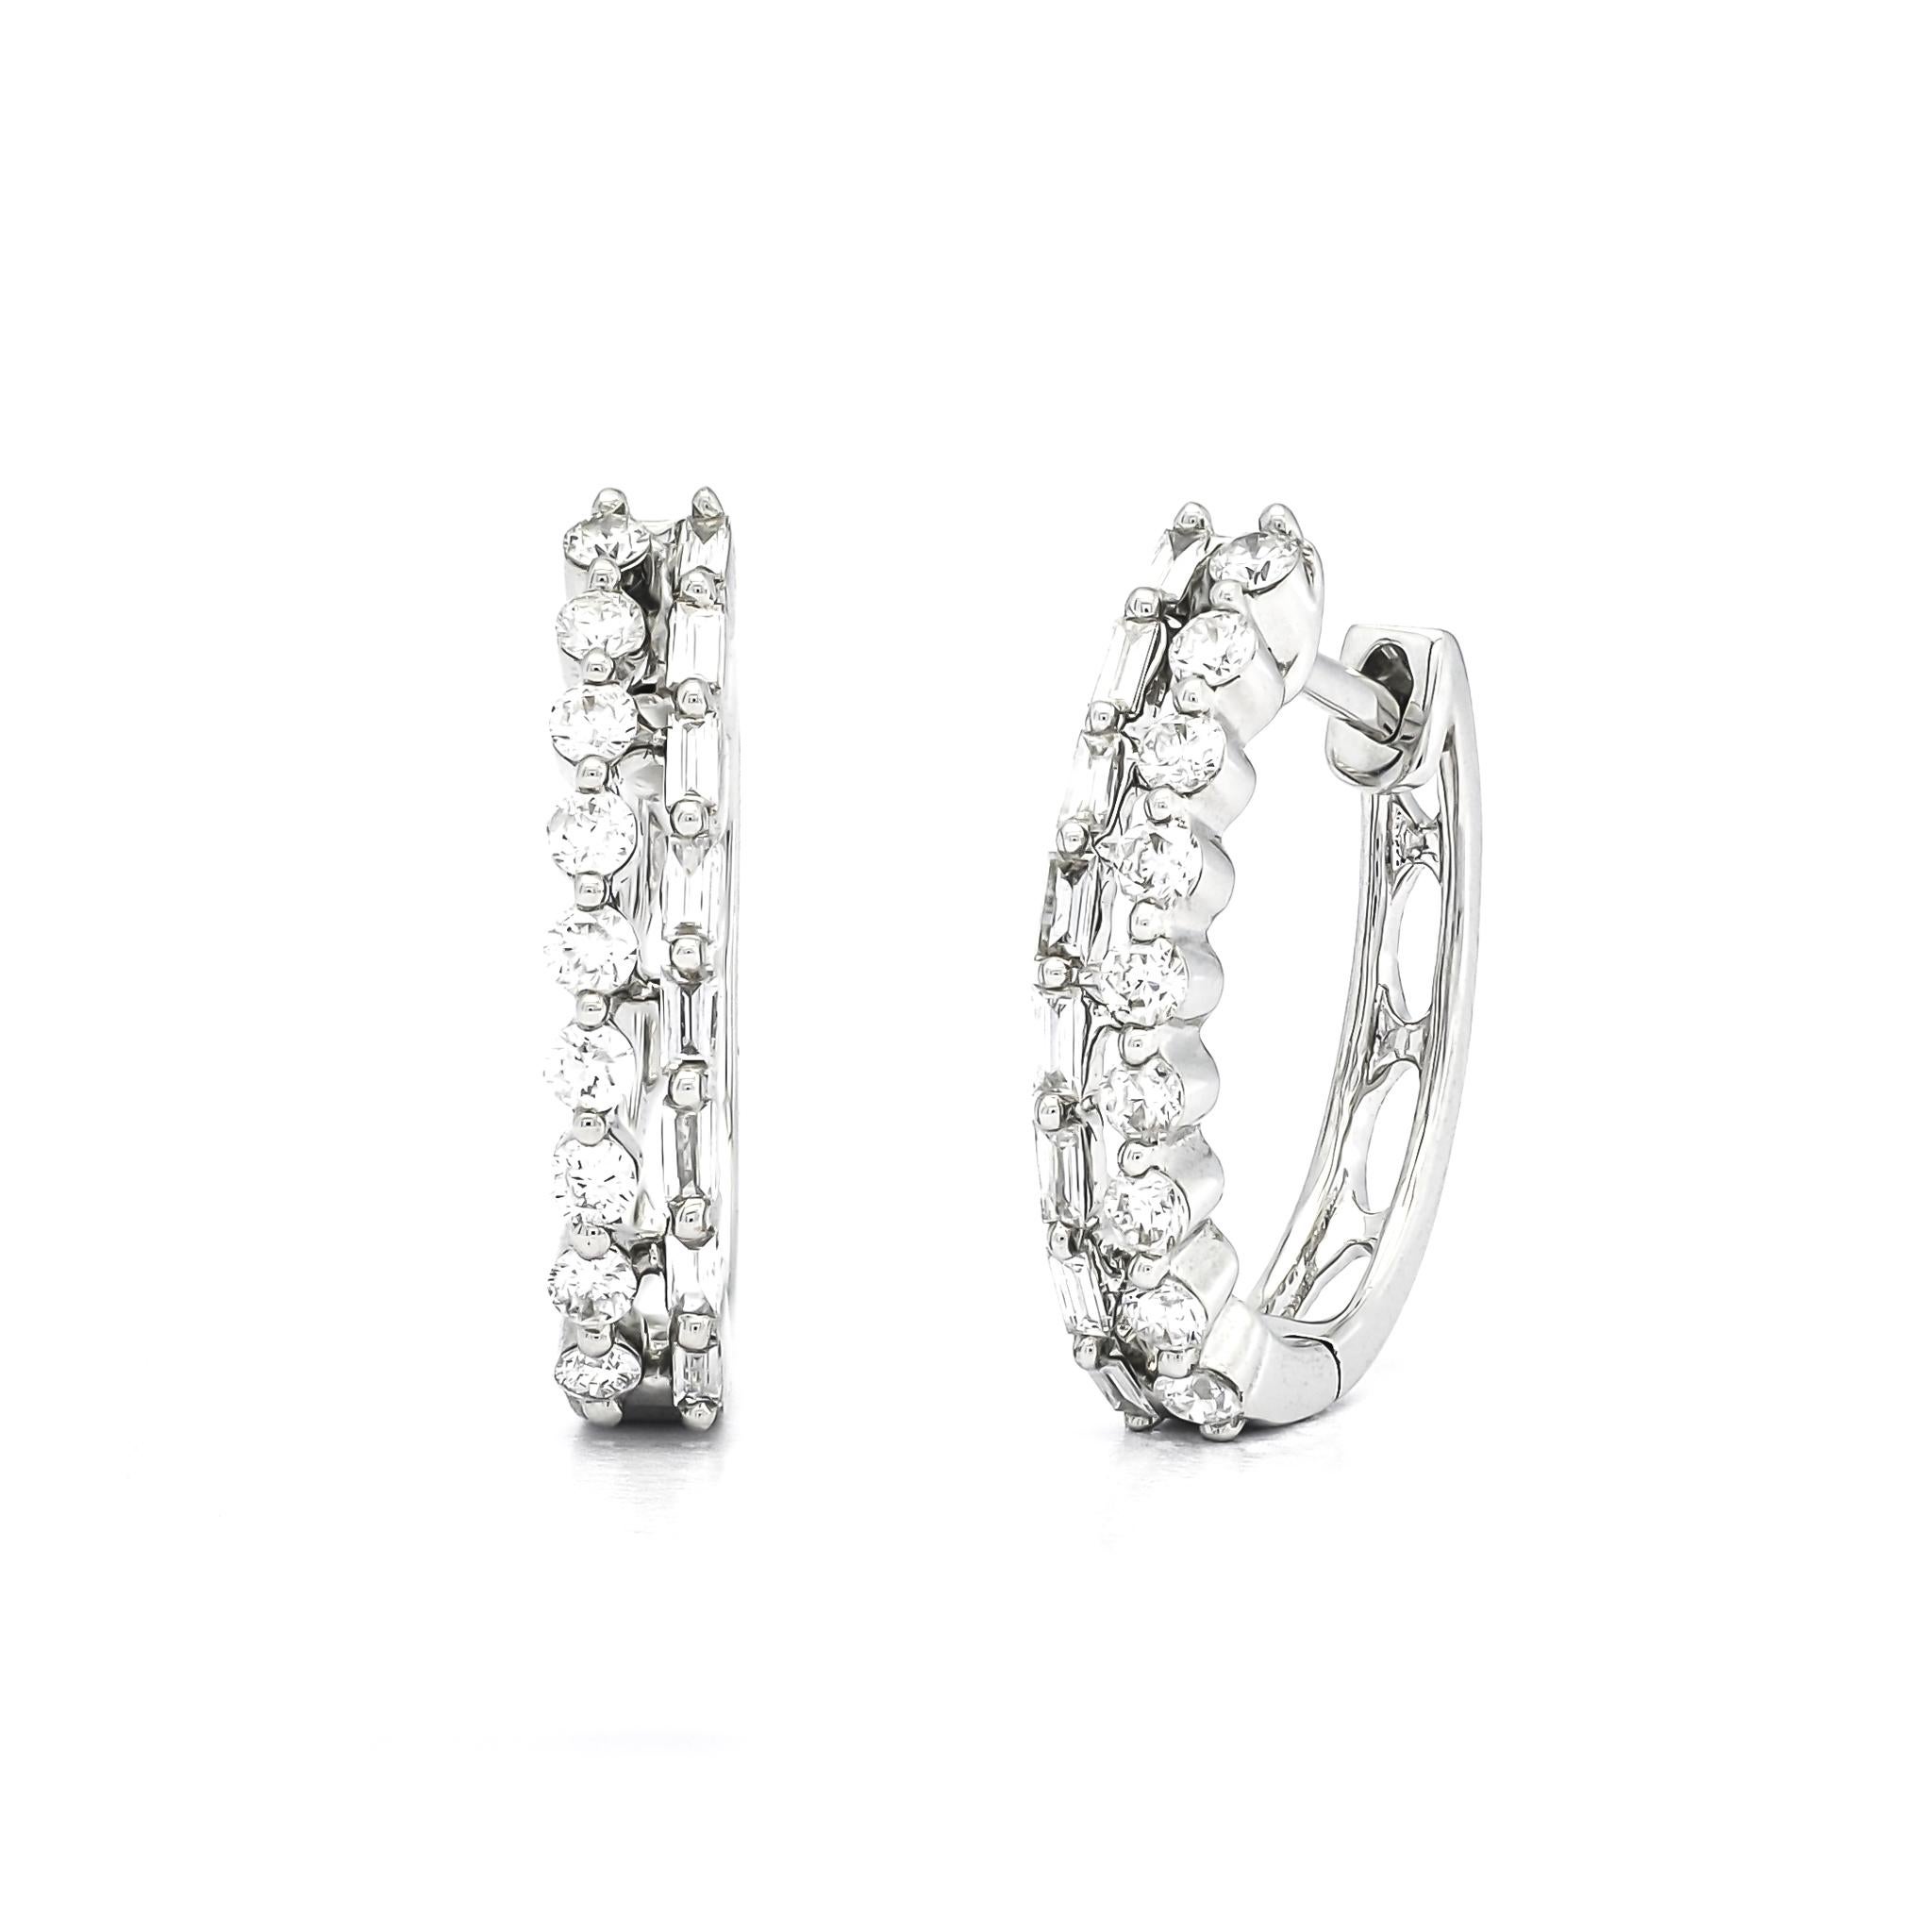 Immerse yourself in the unparalleled beauty of our Exclusive Designer Diamond Hoops, where sophistication meets timeless glamour. These exquisite hoop earrings are crafted to take her breath away, featuring a dazzling combination of baguette and